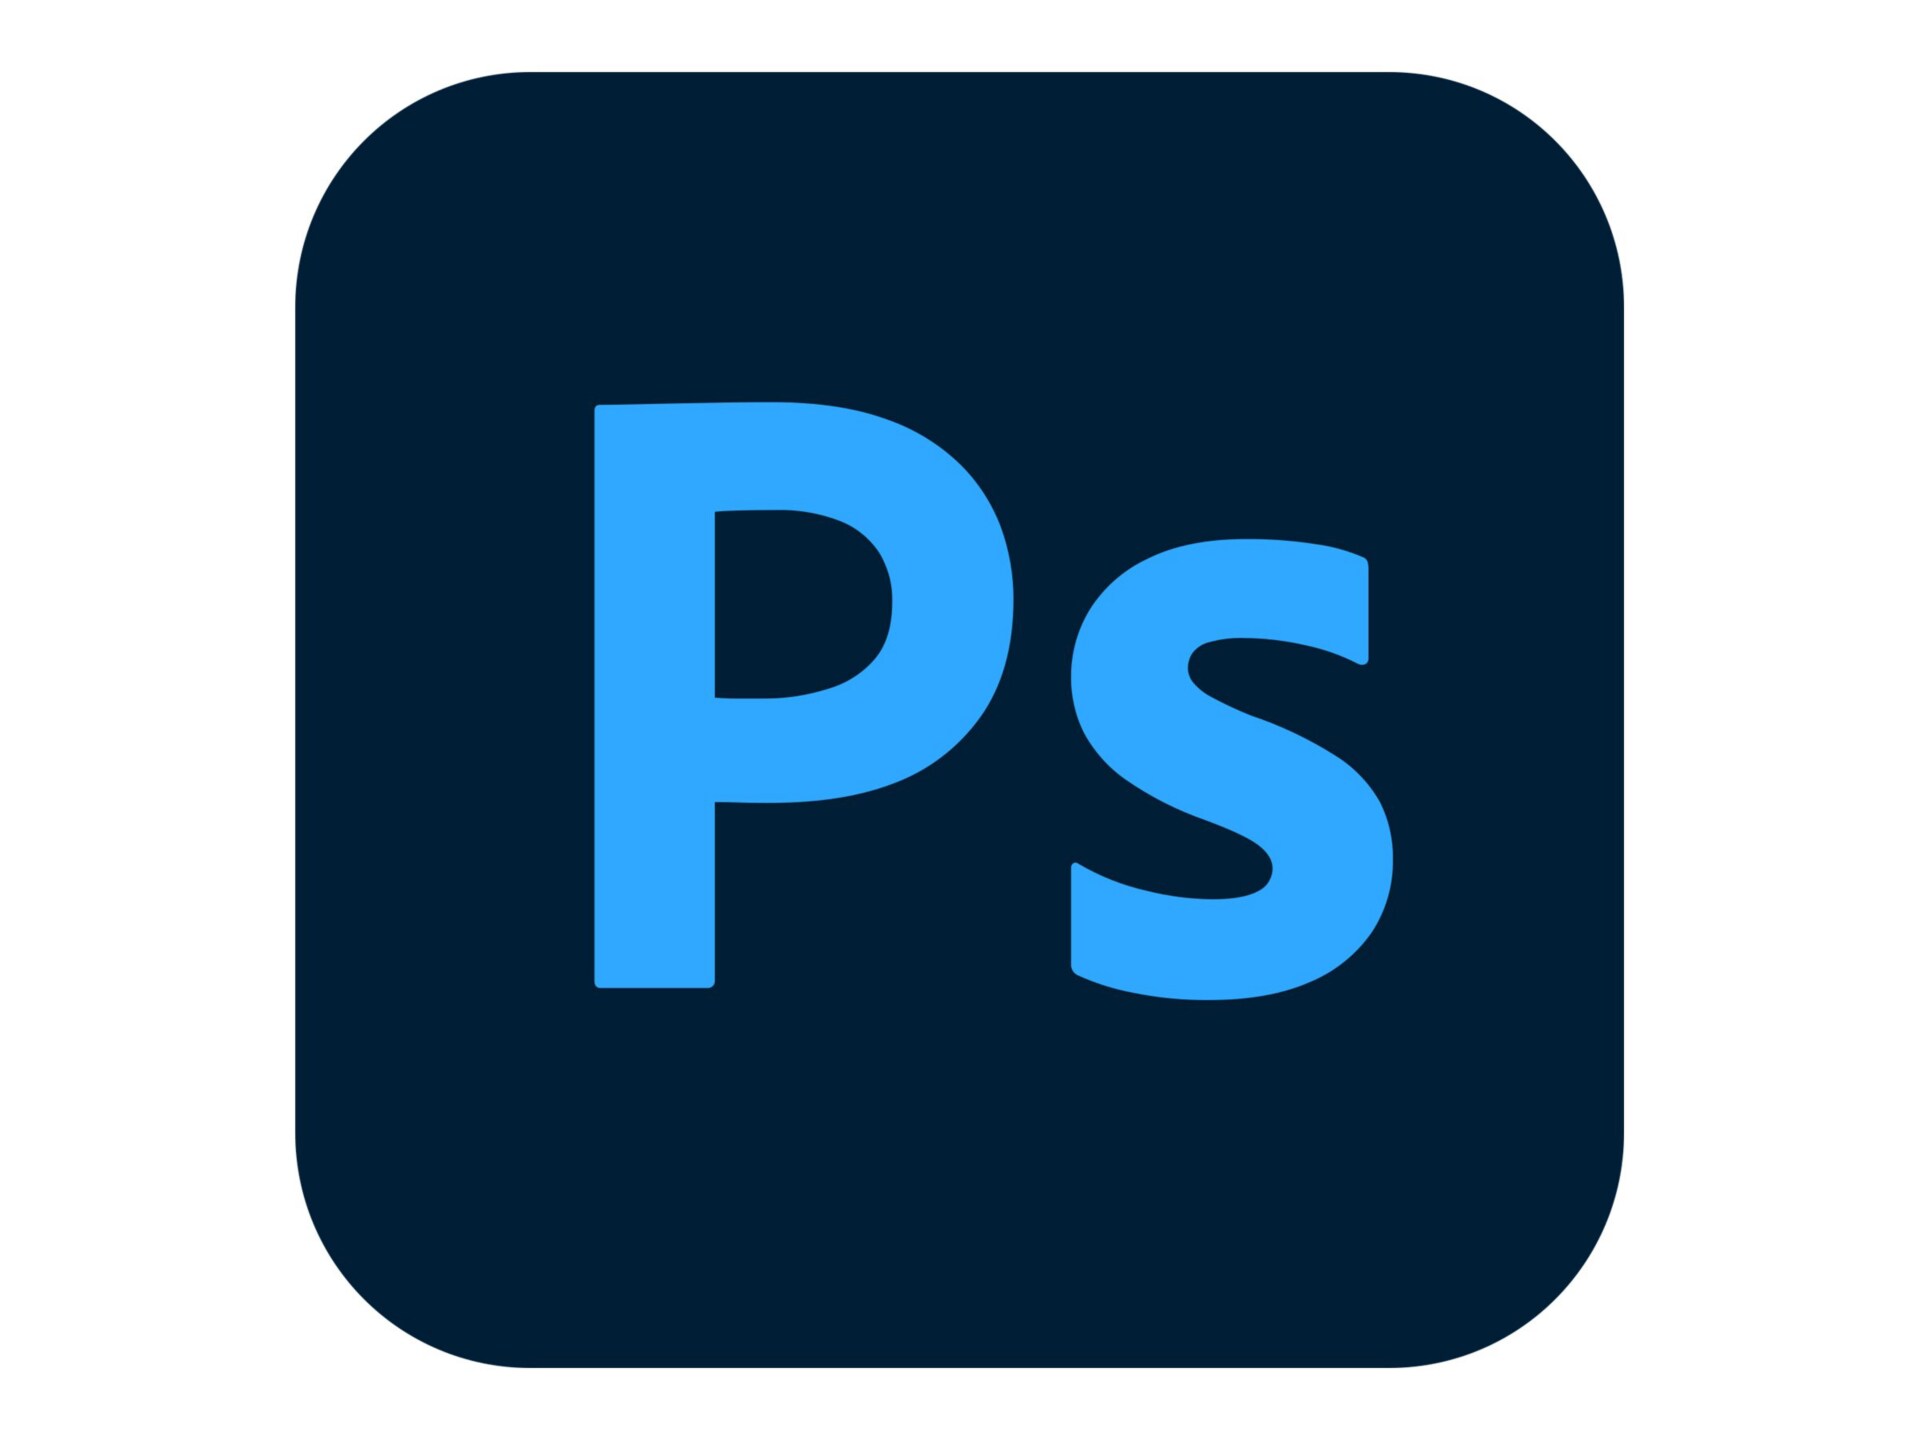 Adobe Photoshop CC for teams - Subscription New (4 years) - 1 named user